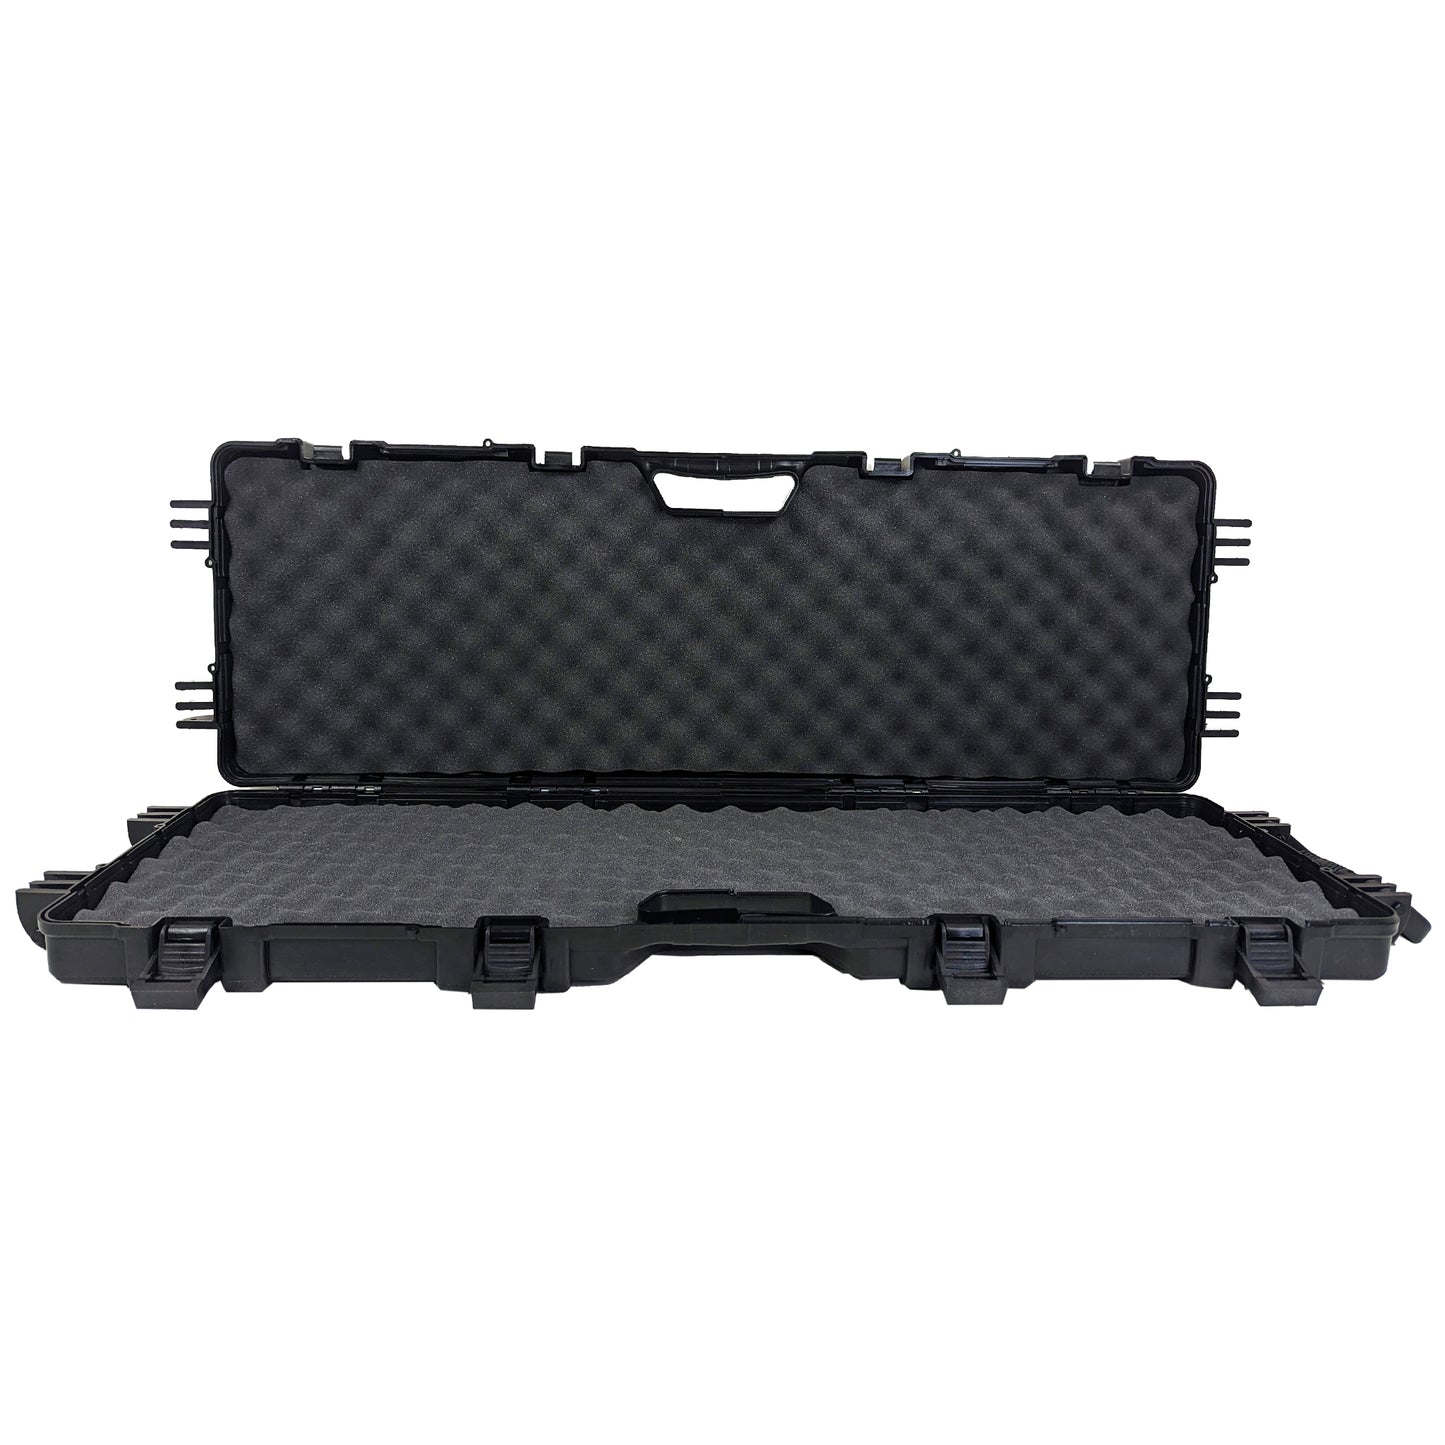 Emperor Arms 43.5" Hard Rifle Gun Case, Long Lockable Storage Box, Plastic Travel Case, Protective Luggage with Foam Insert